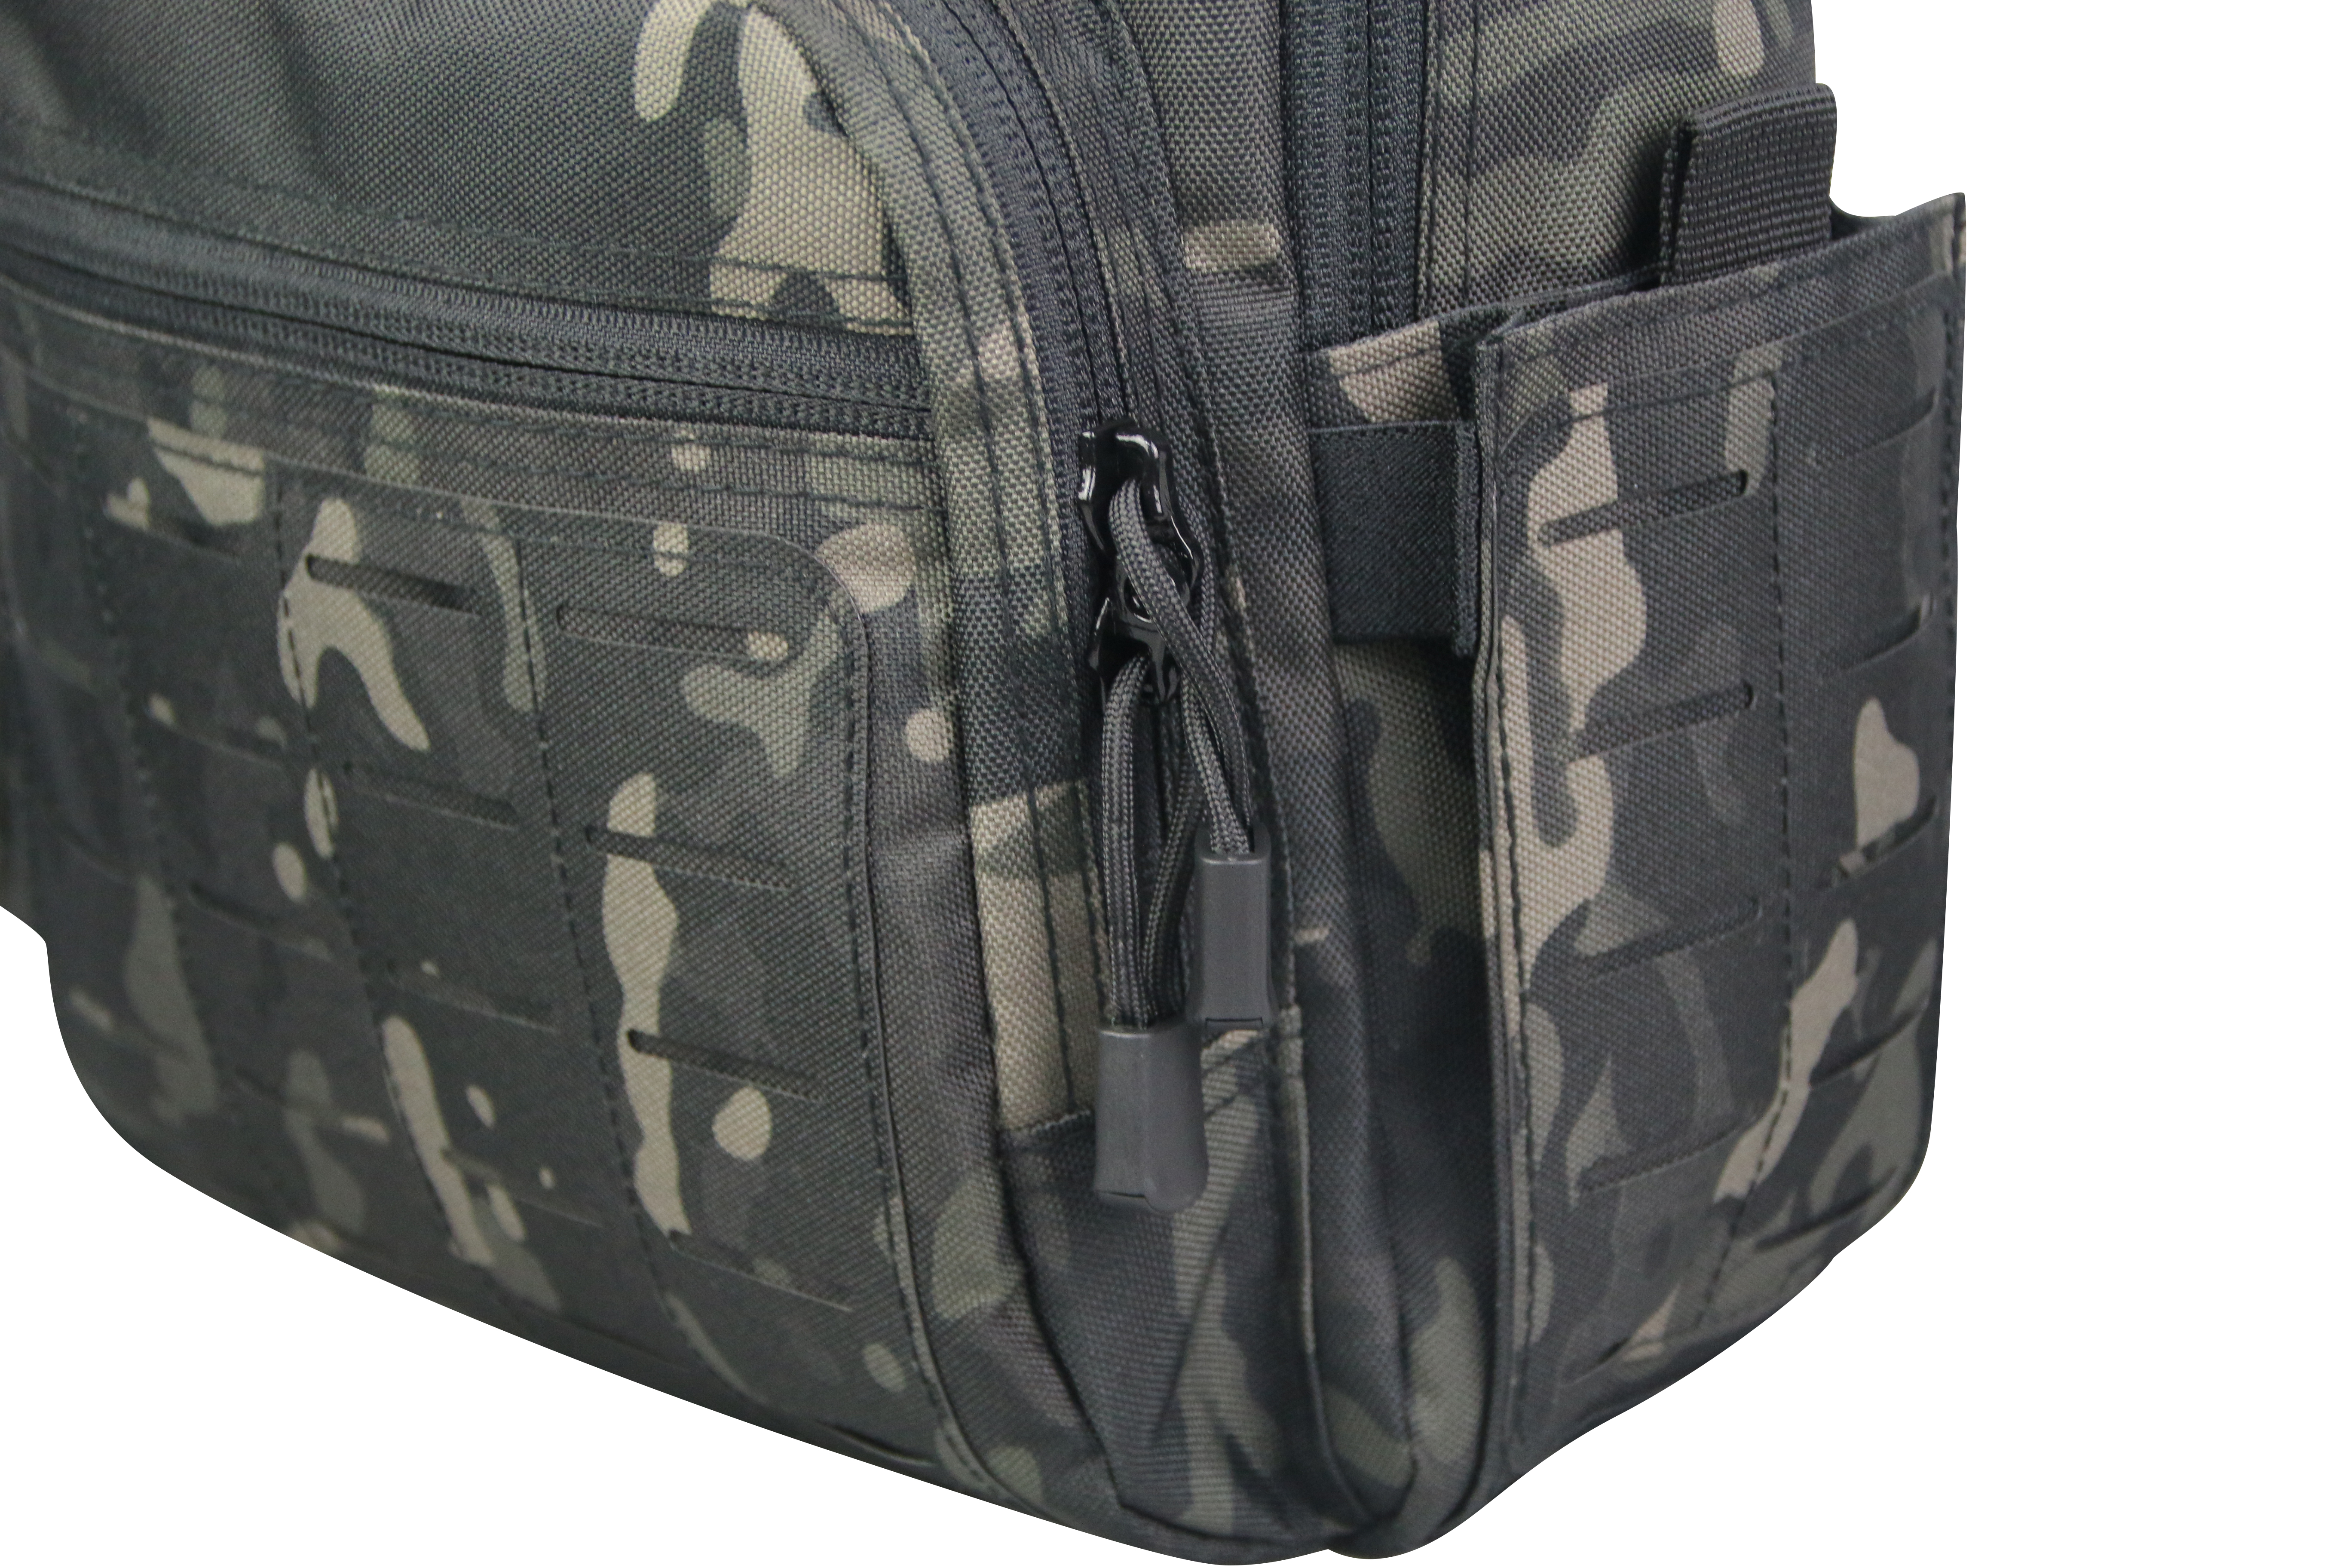 Sling Tactical Sling Rover Militaire Sling EDC Sac à dos EDC